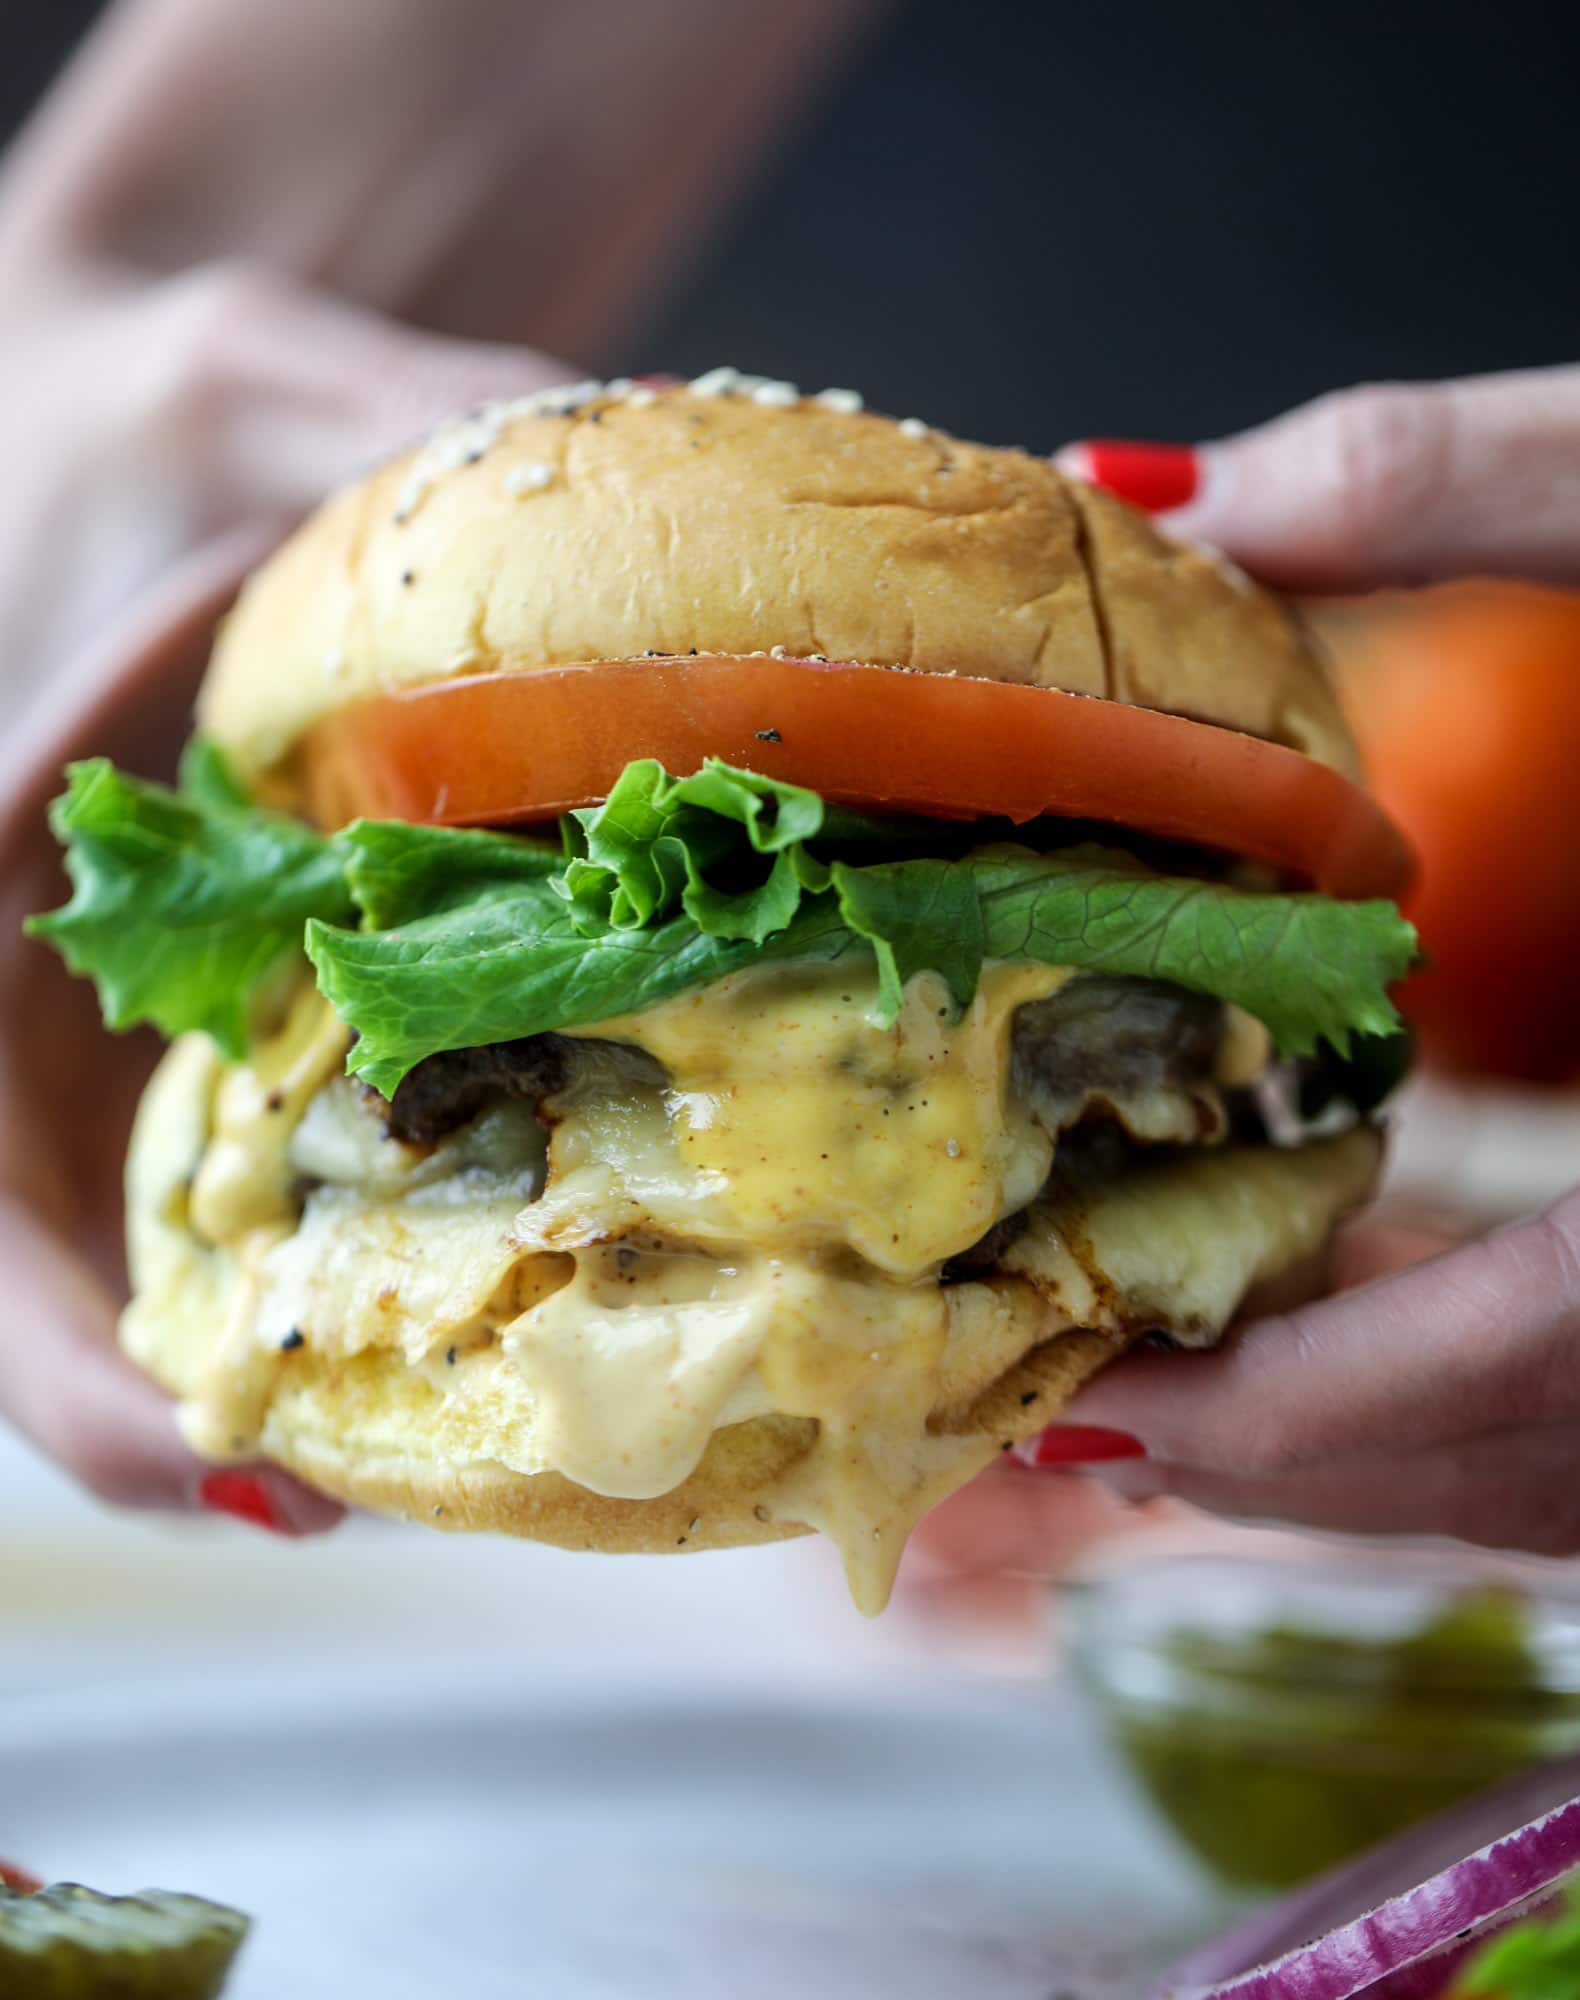 These smash burgers are to die for! All you need are a few ingredients and 30 minutes to make these smash burgers happen. Topped with melty smoked gouda and topped with a creamy, tangy house sauce, these are the best burgers ever! I howsweeteats.com #smash #burgers #smoked #gouda #special #sauce